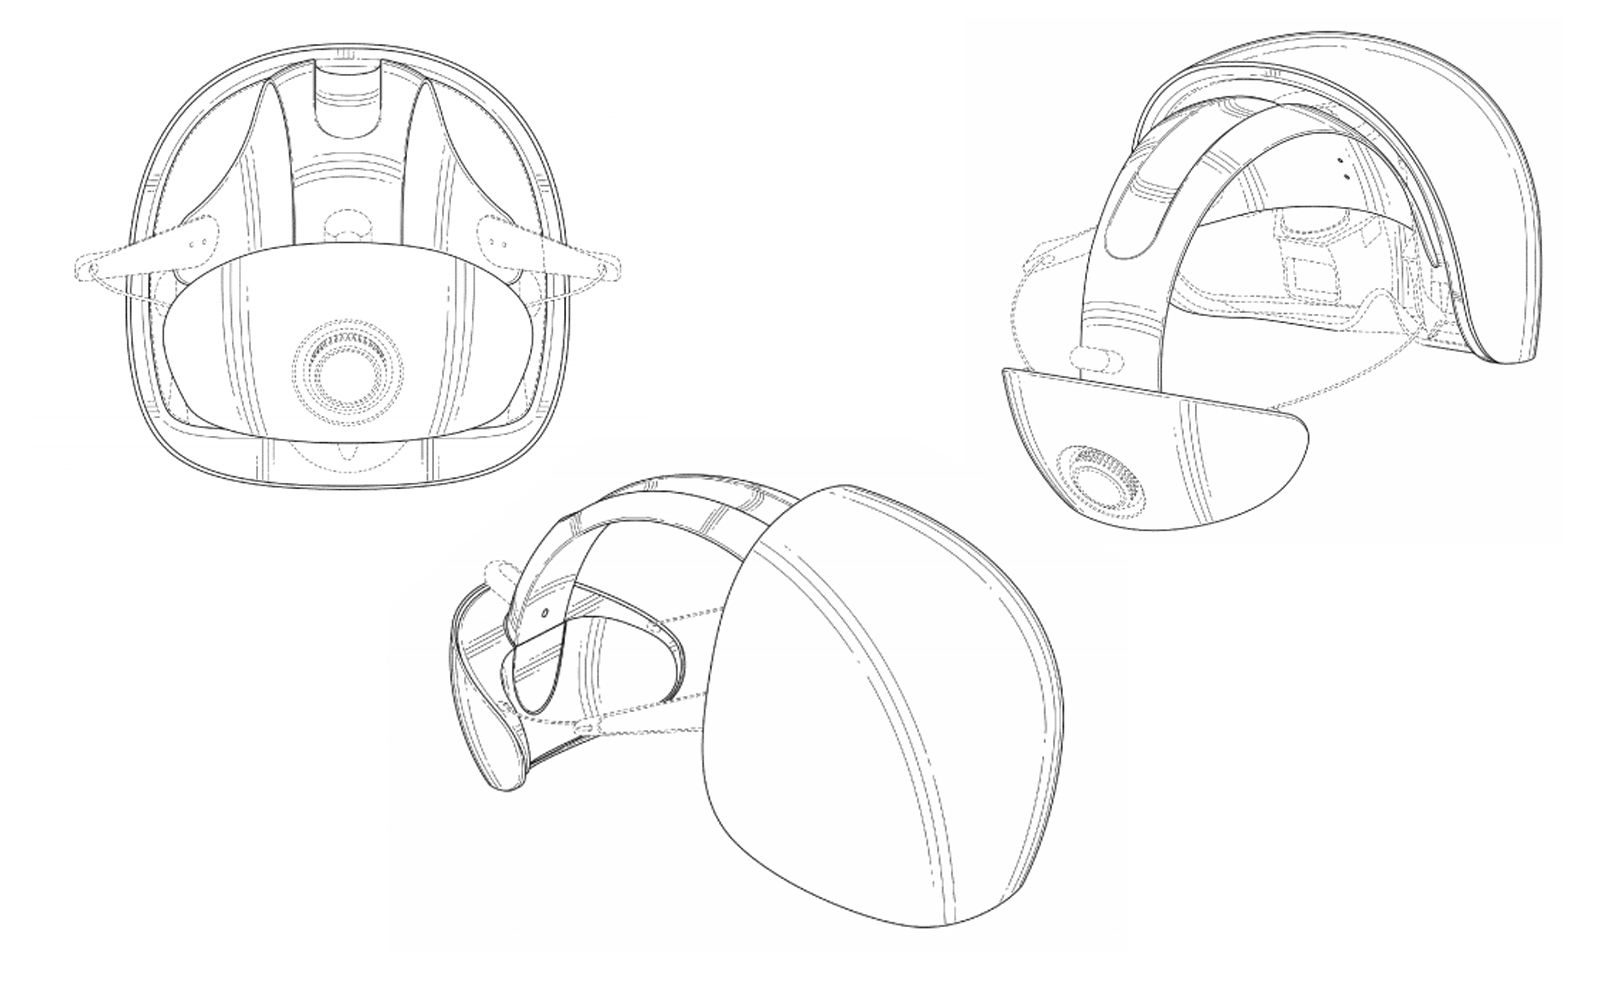 magic leap headset the future of ar glimpsed in patent pictures image 1